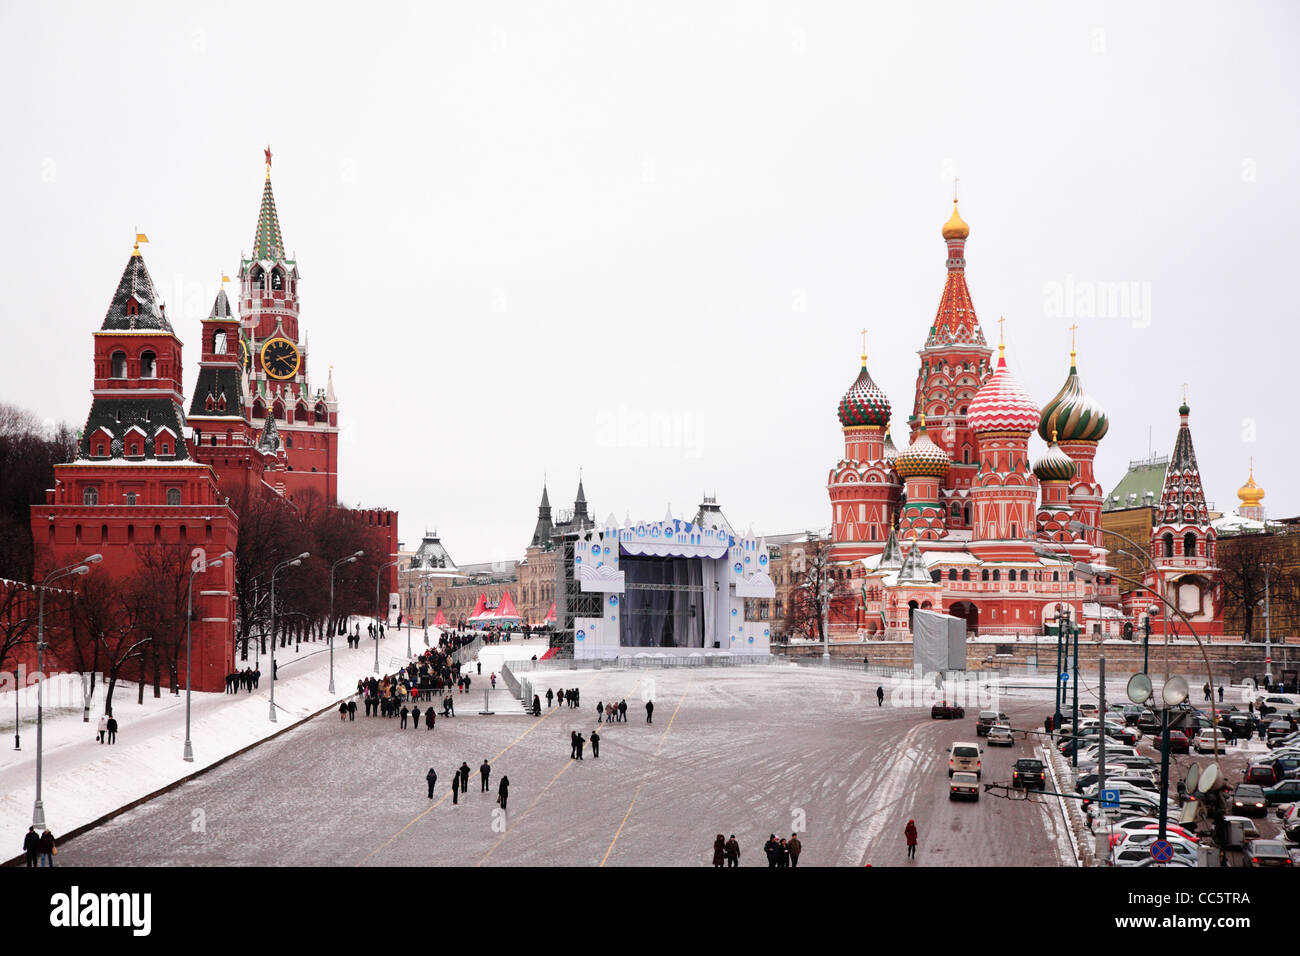 View of Kremlin and St. Basil's cathedral in winter Stock Photo